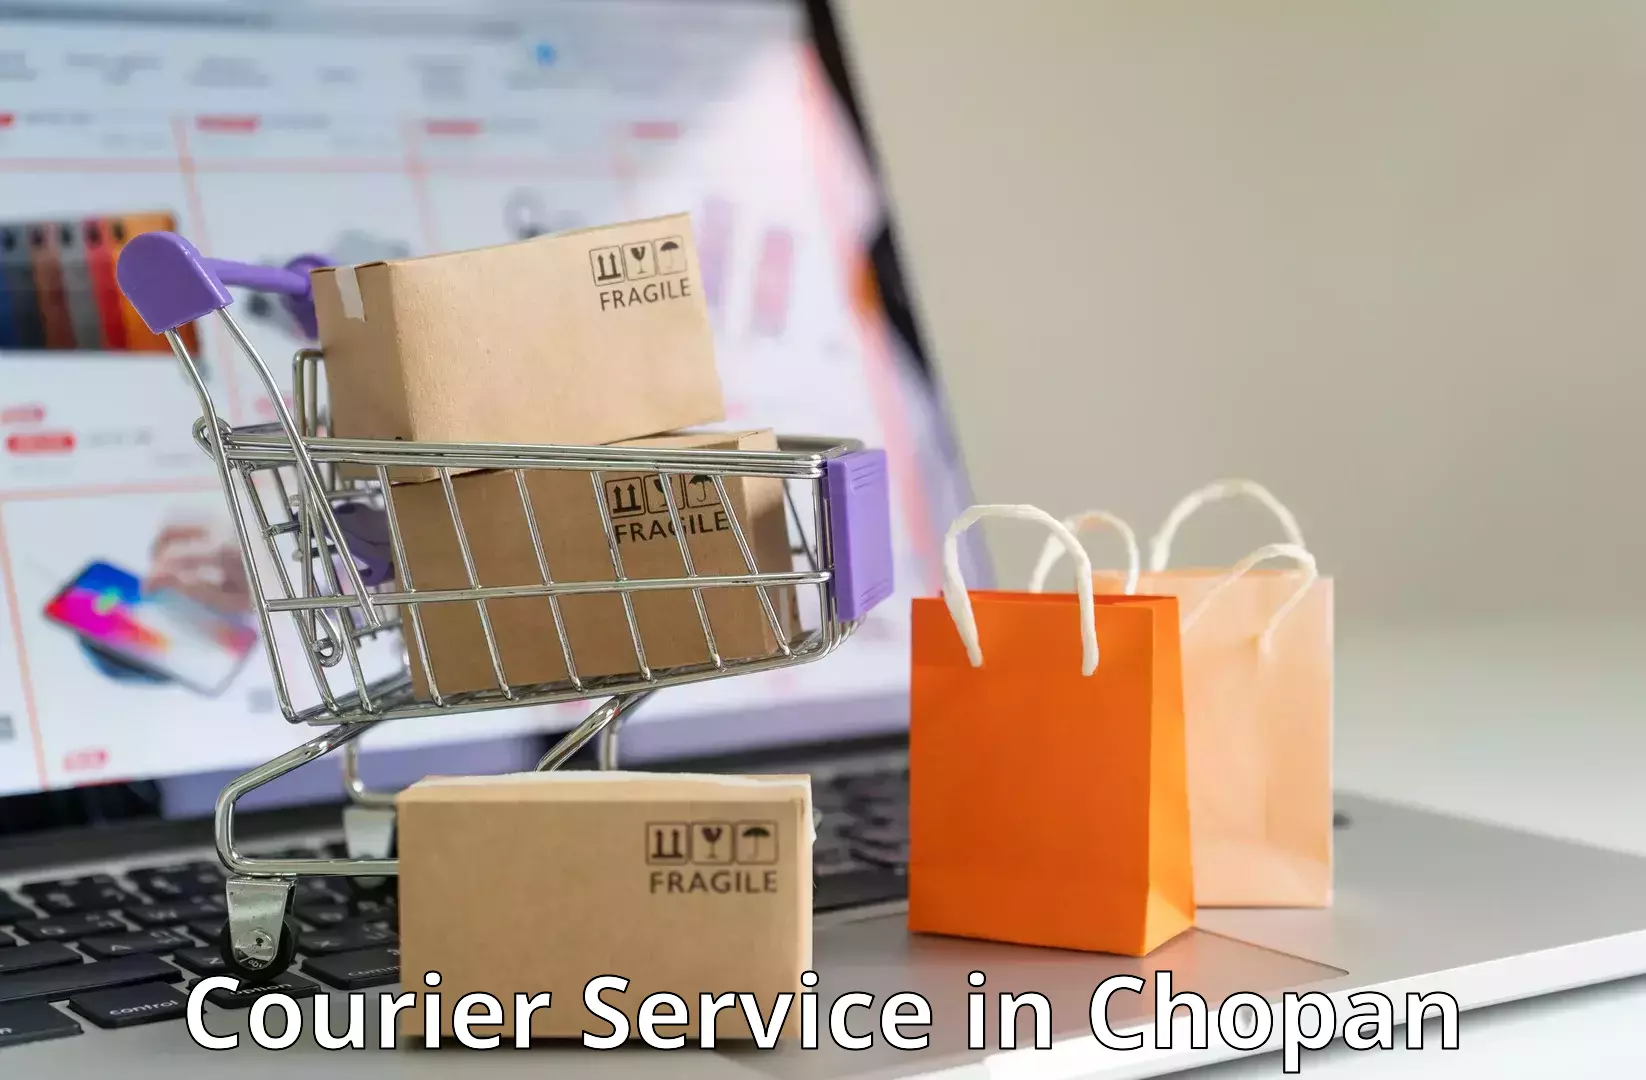 Courier service partnerships in Chopan